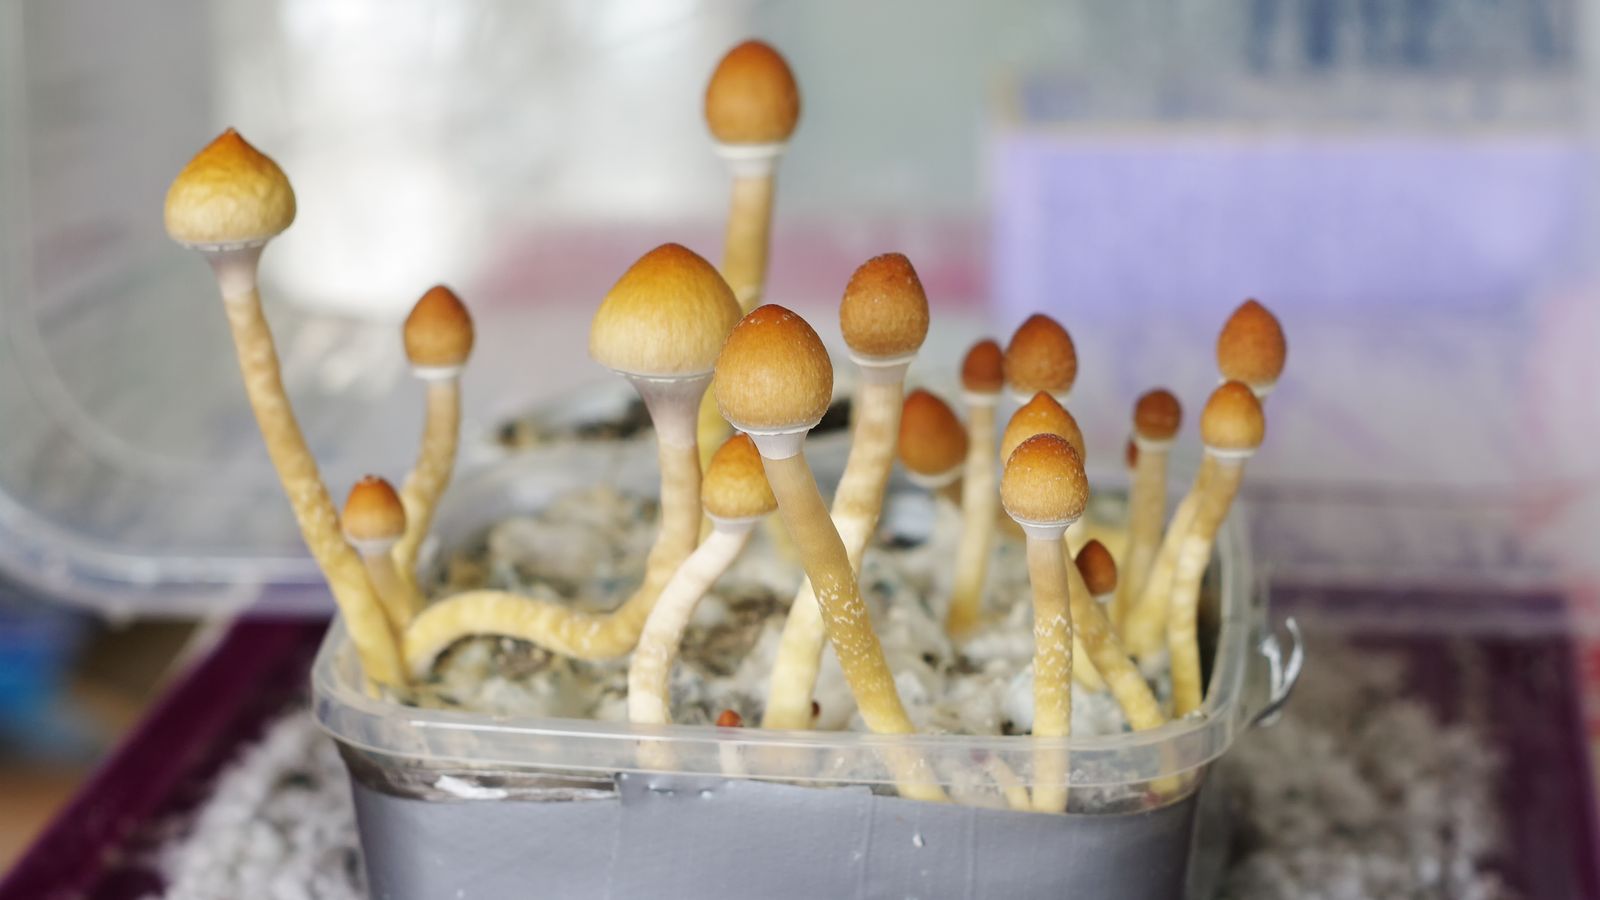 Magic mushrooms 'could help women deal with cancer-related depression'